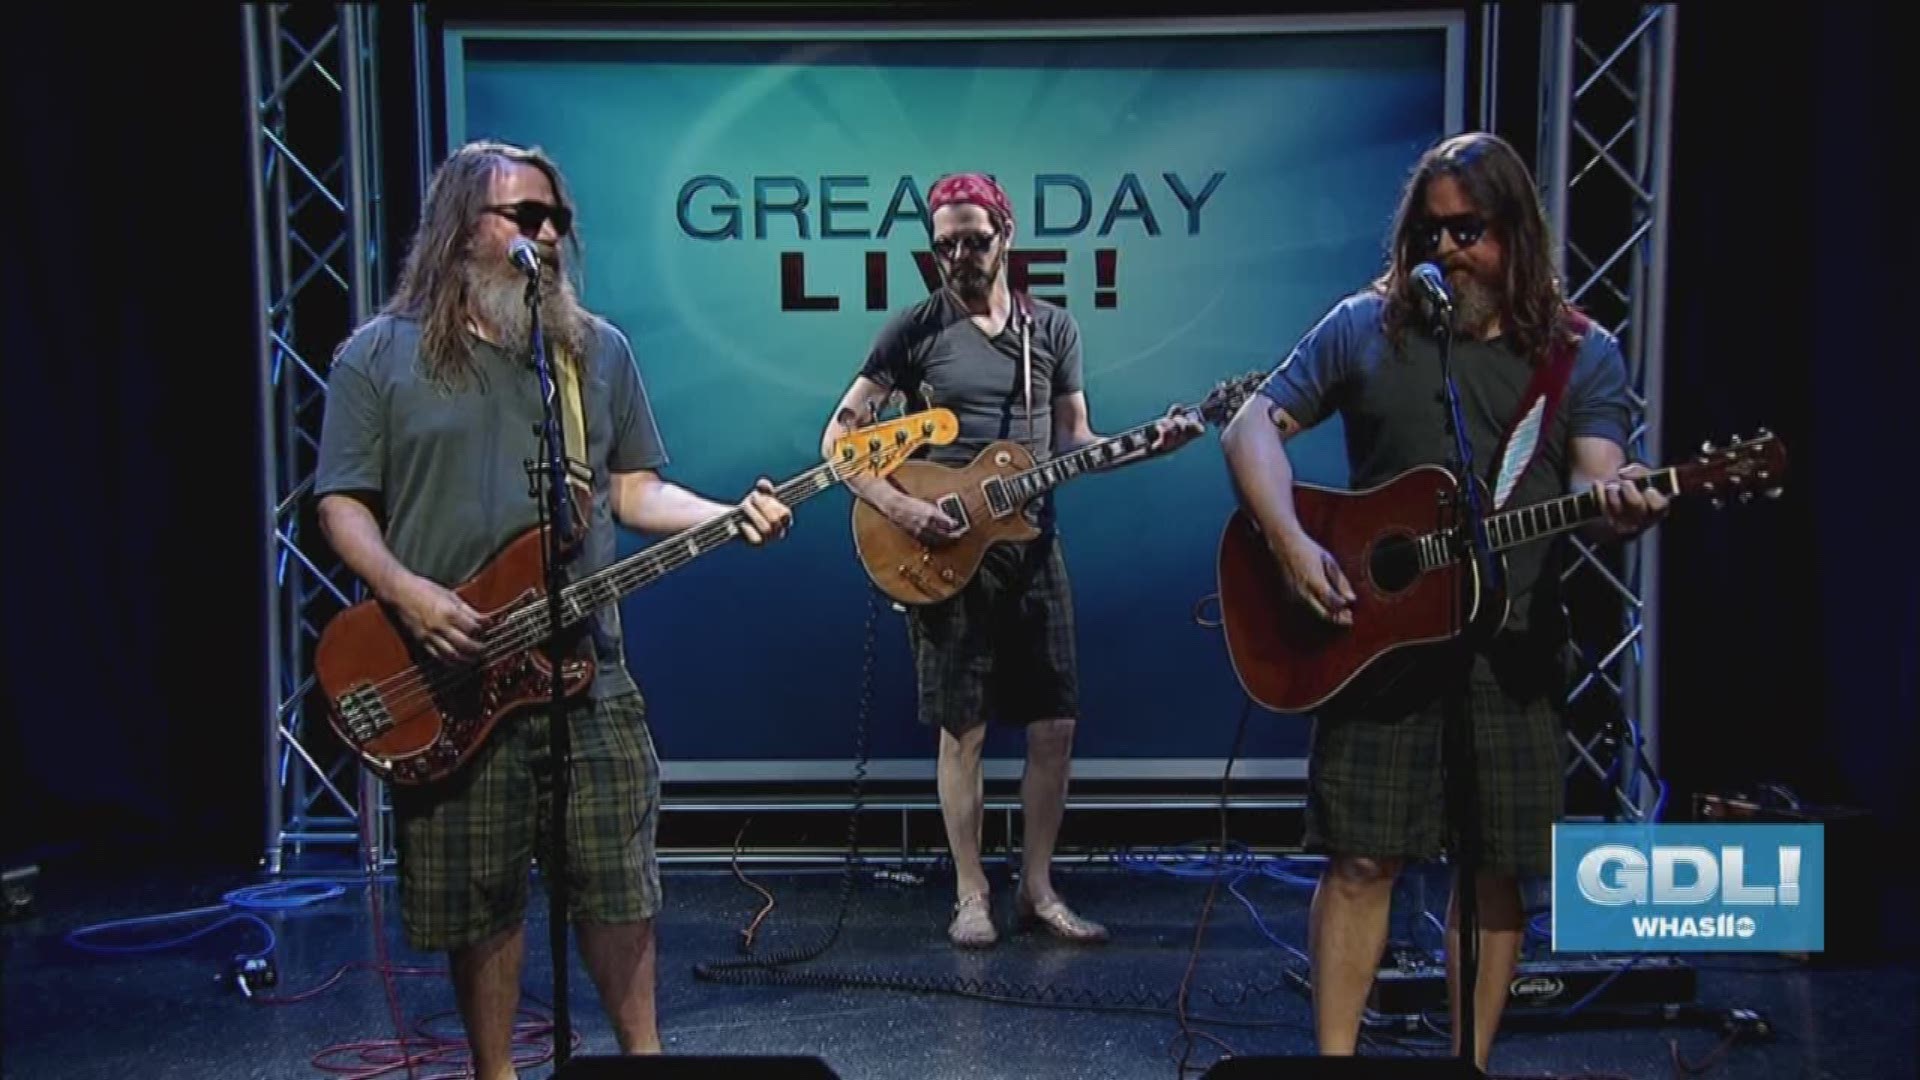 The Dudes Band performs every year the night before Lebowski Fest. They stopped by Great Day Live to give a preview of their performance.